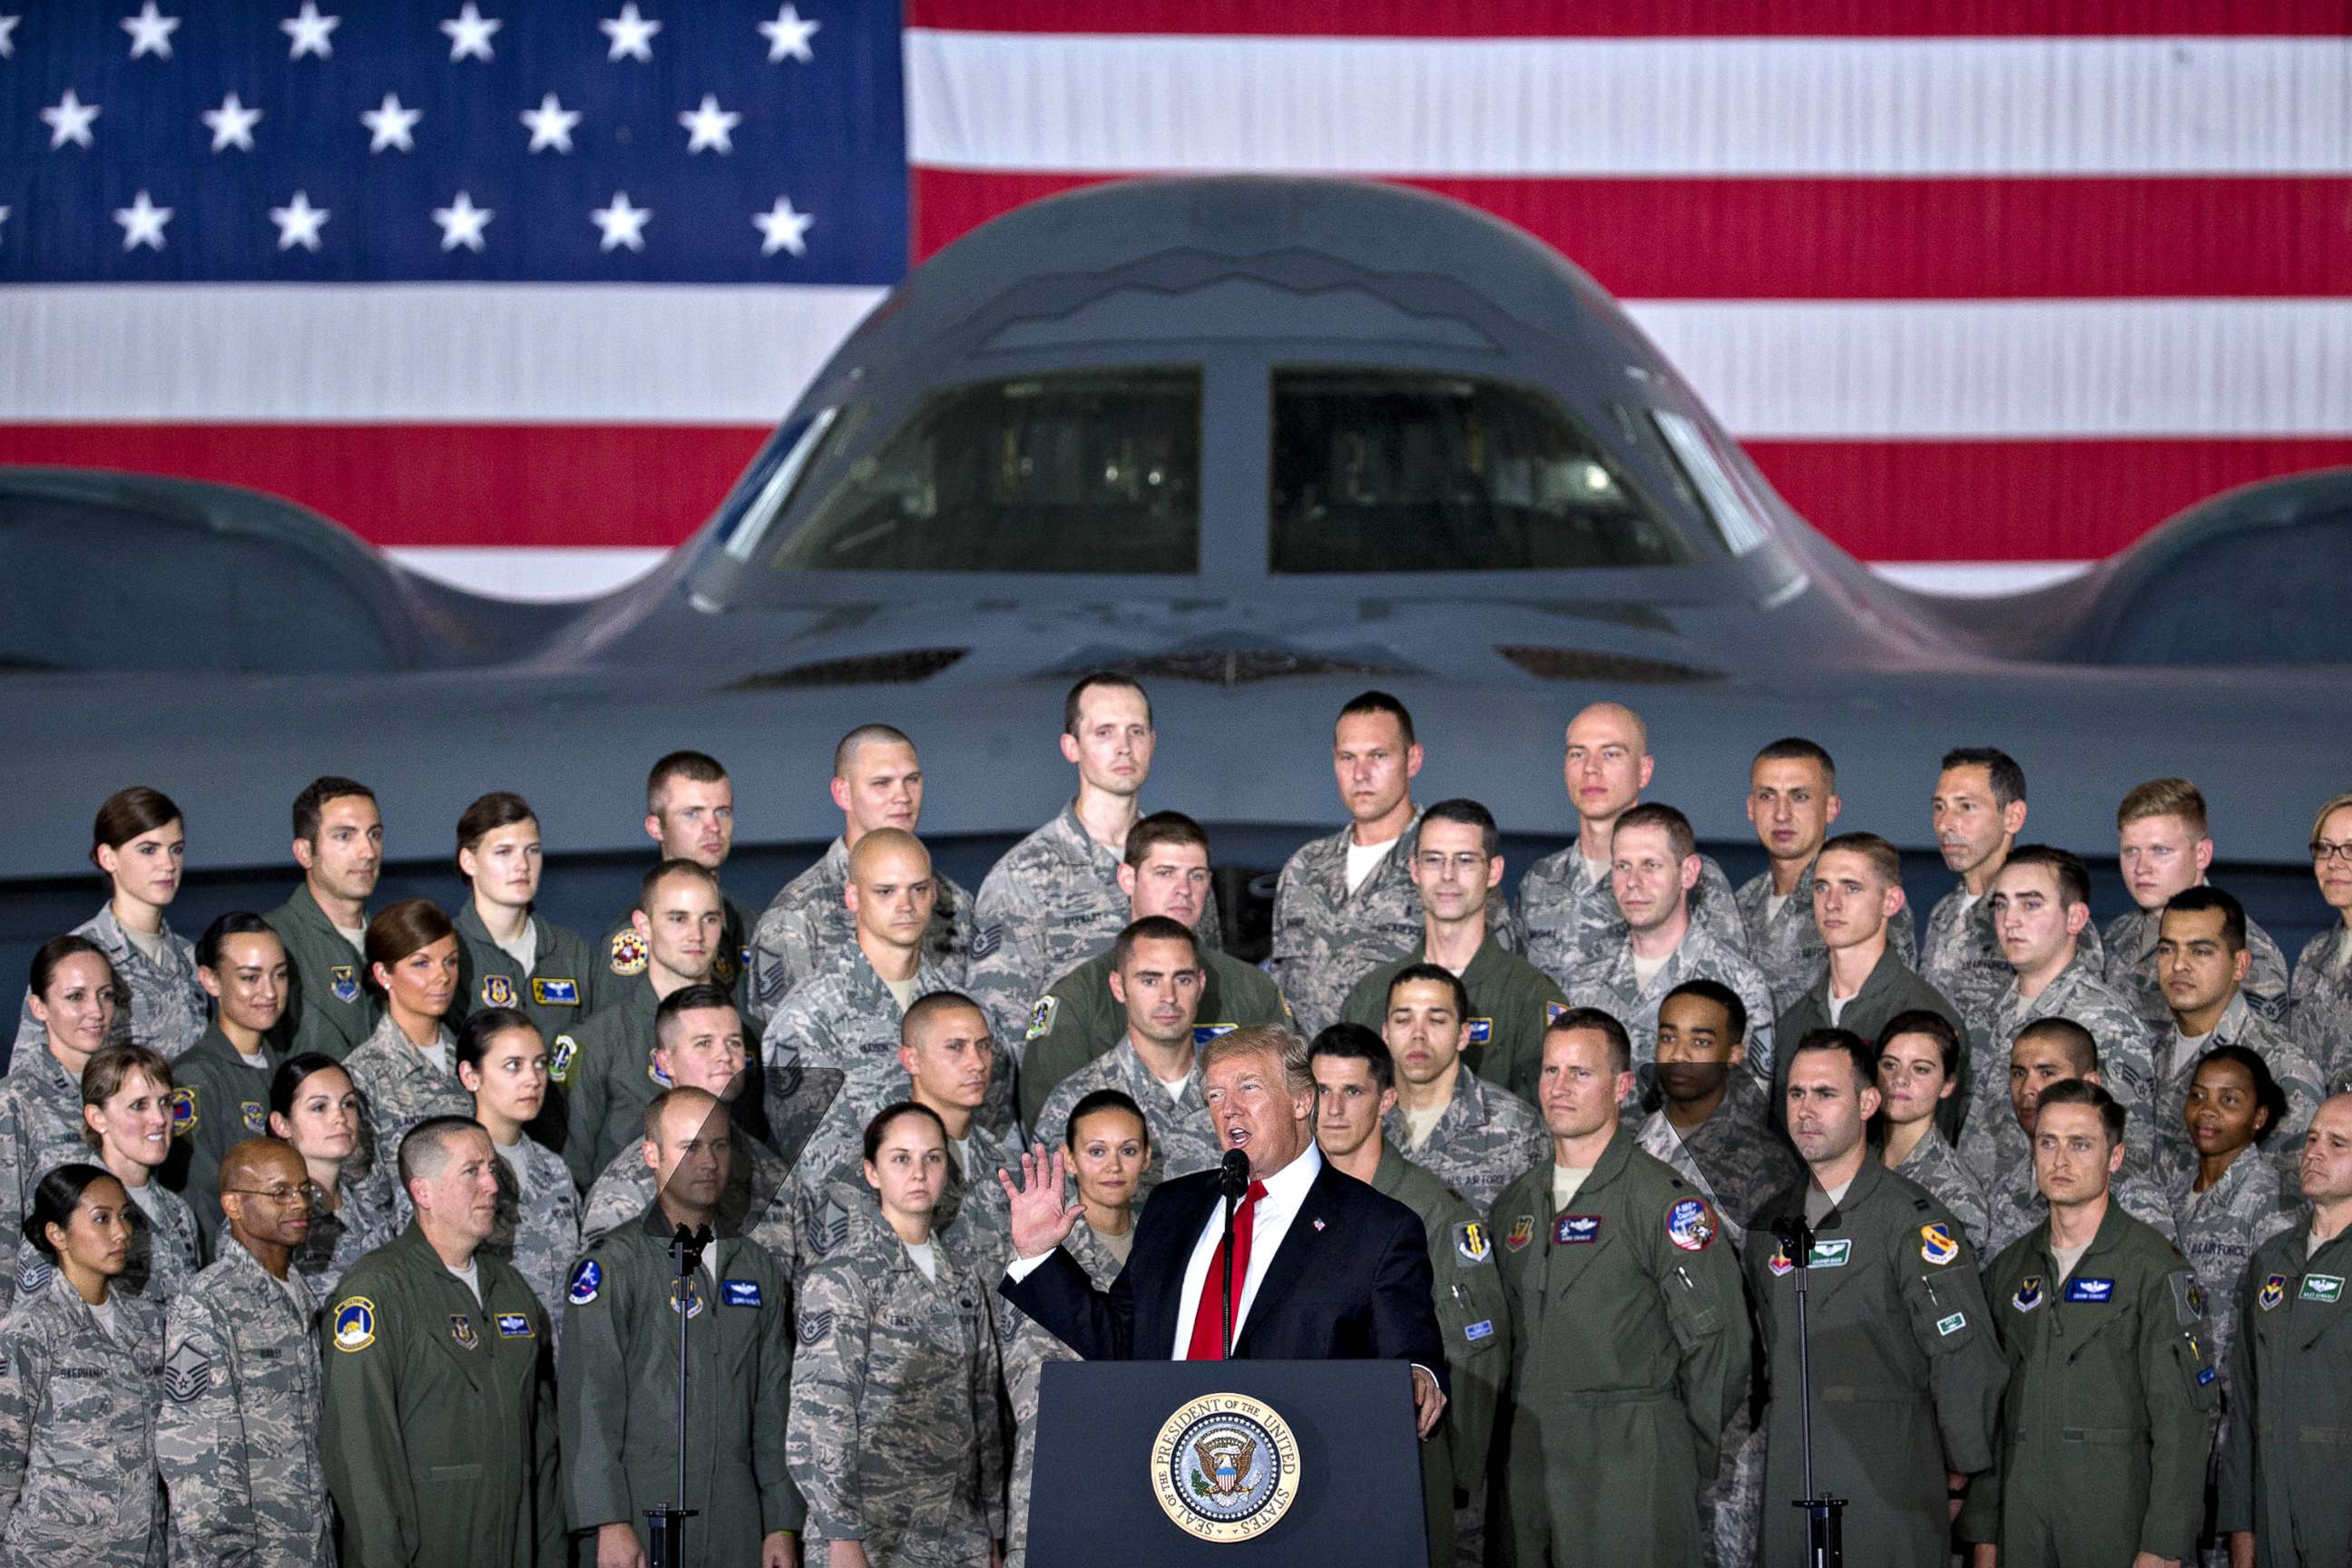 PHOTO: President Donald Trump delivers remarks to military personnel and families in an aircraft hangar at Joint Base Andrews, Maryland, Sept. 15, 2017.